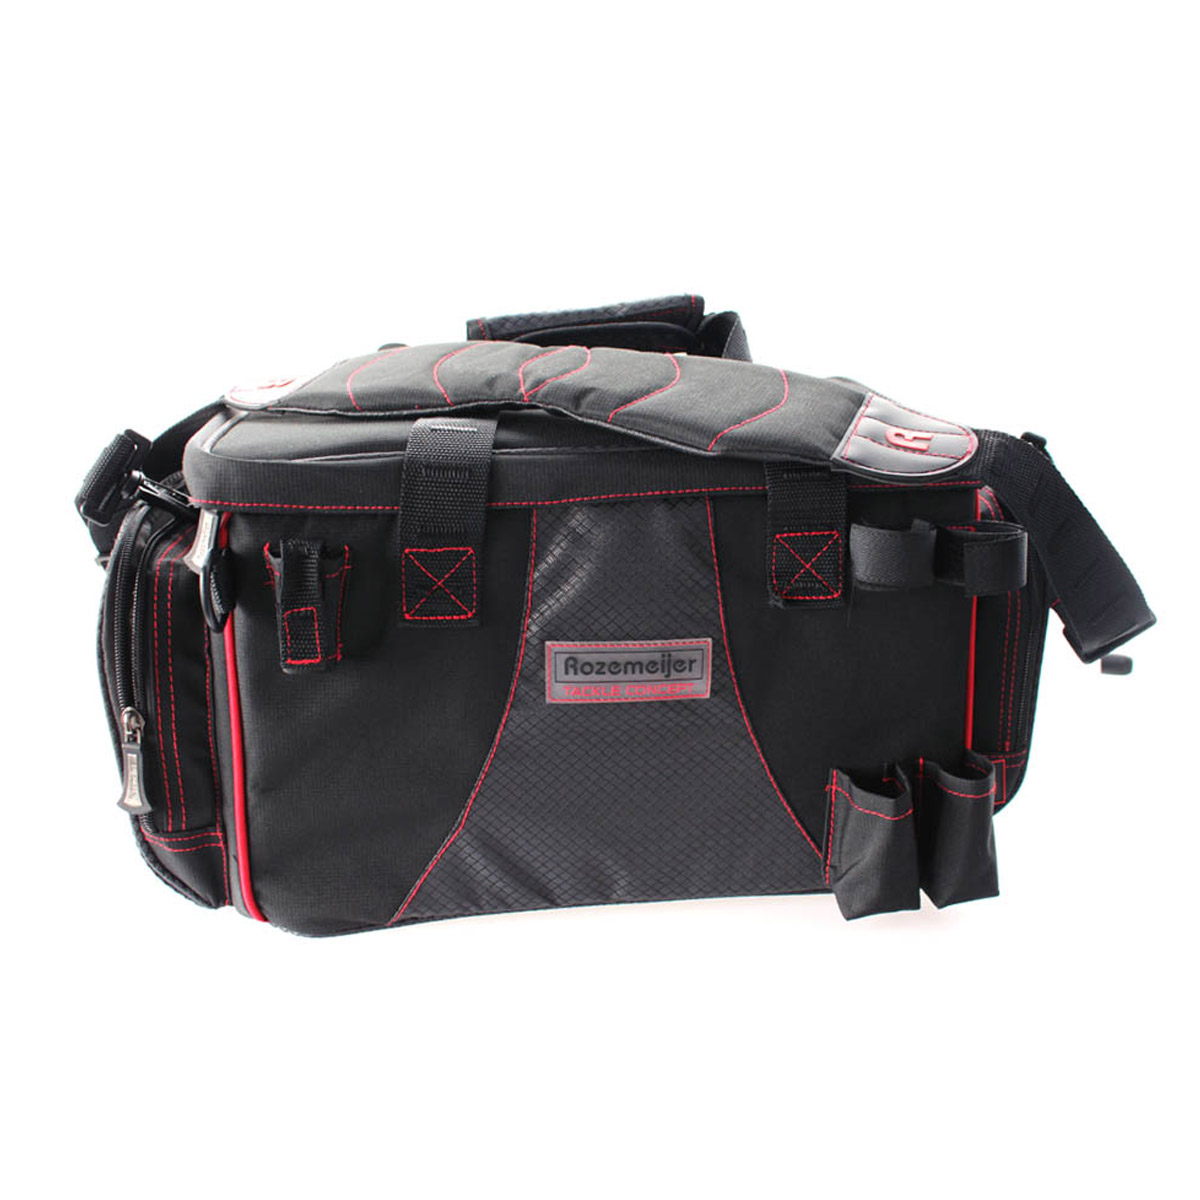 Rozemeijer Tackle Concept Carryall